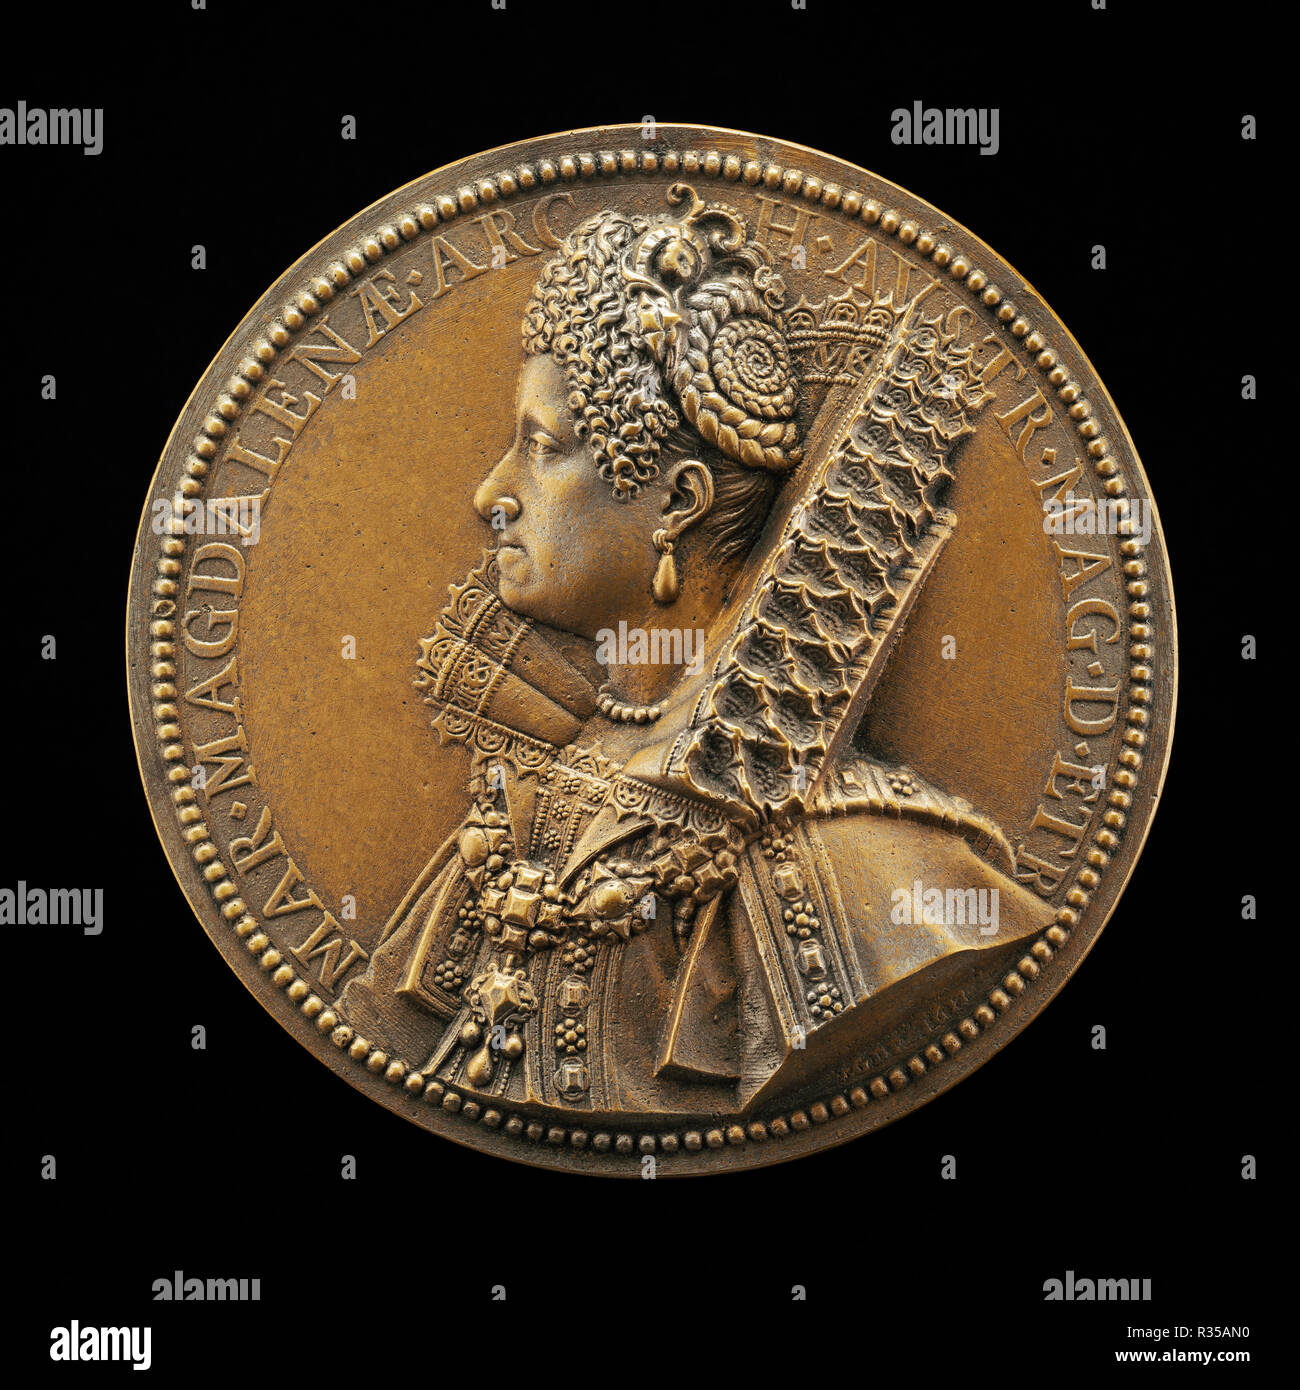 Maria Magdalena, Grand Duchess of Tuscany, Wife of Cosimo II de' Medici 1589. Dated: 1613. Dimensions: overall (diameter): 9.37 cm (3 11/16 in.)  gross weight: 130.49 gr (0.288 lb.). Medium: bronze//Cast hollow. Museum: National Gallery of Art, Washington DC. Author: Guillaume Dupré. Stock Photo